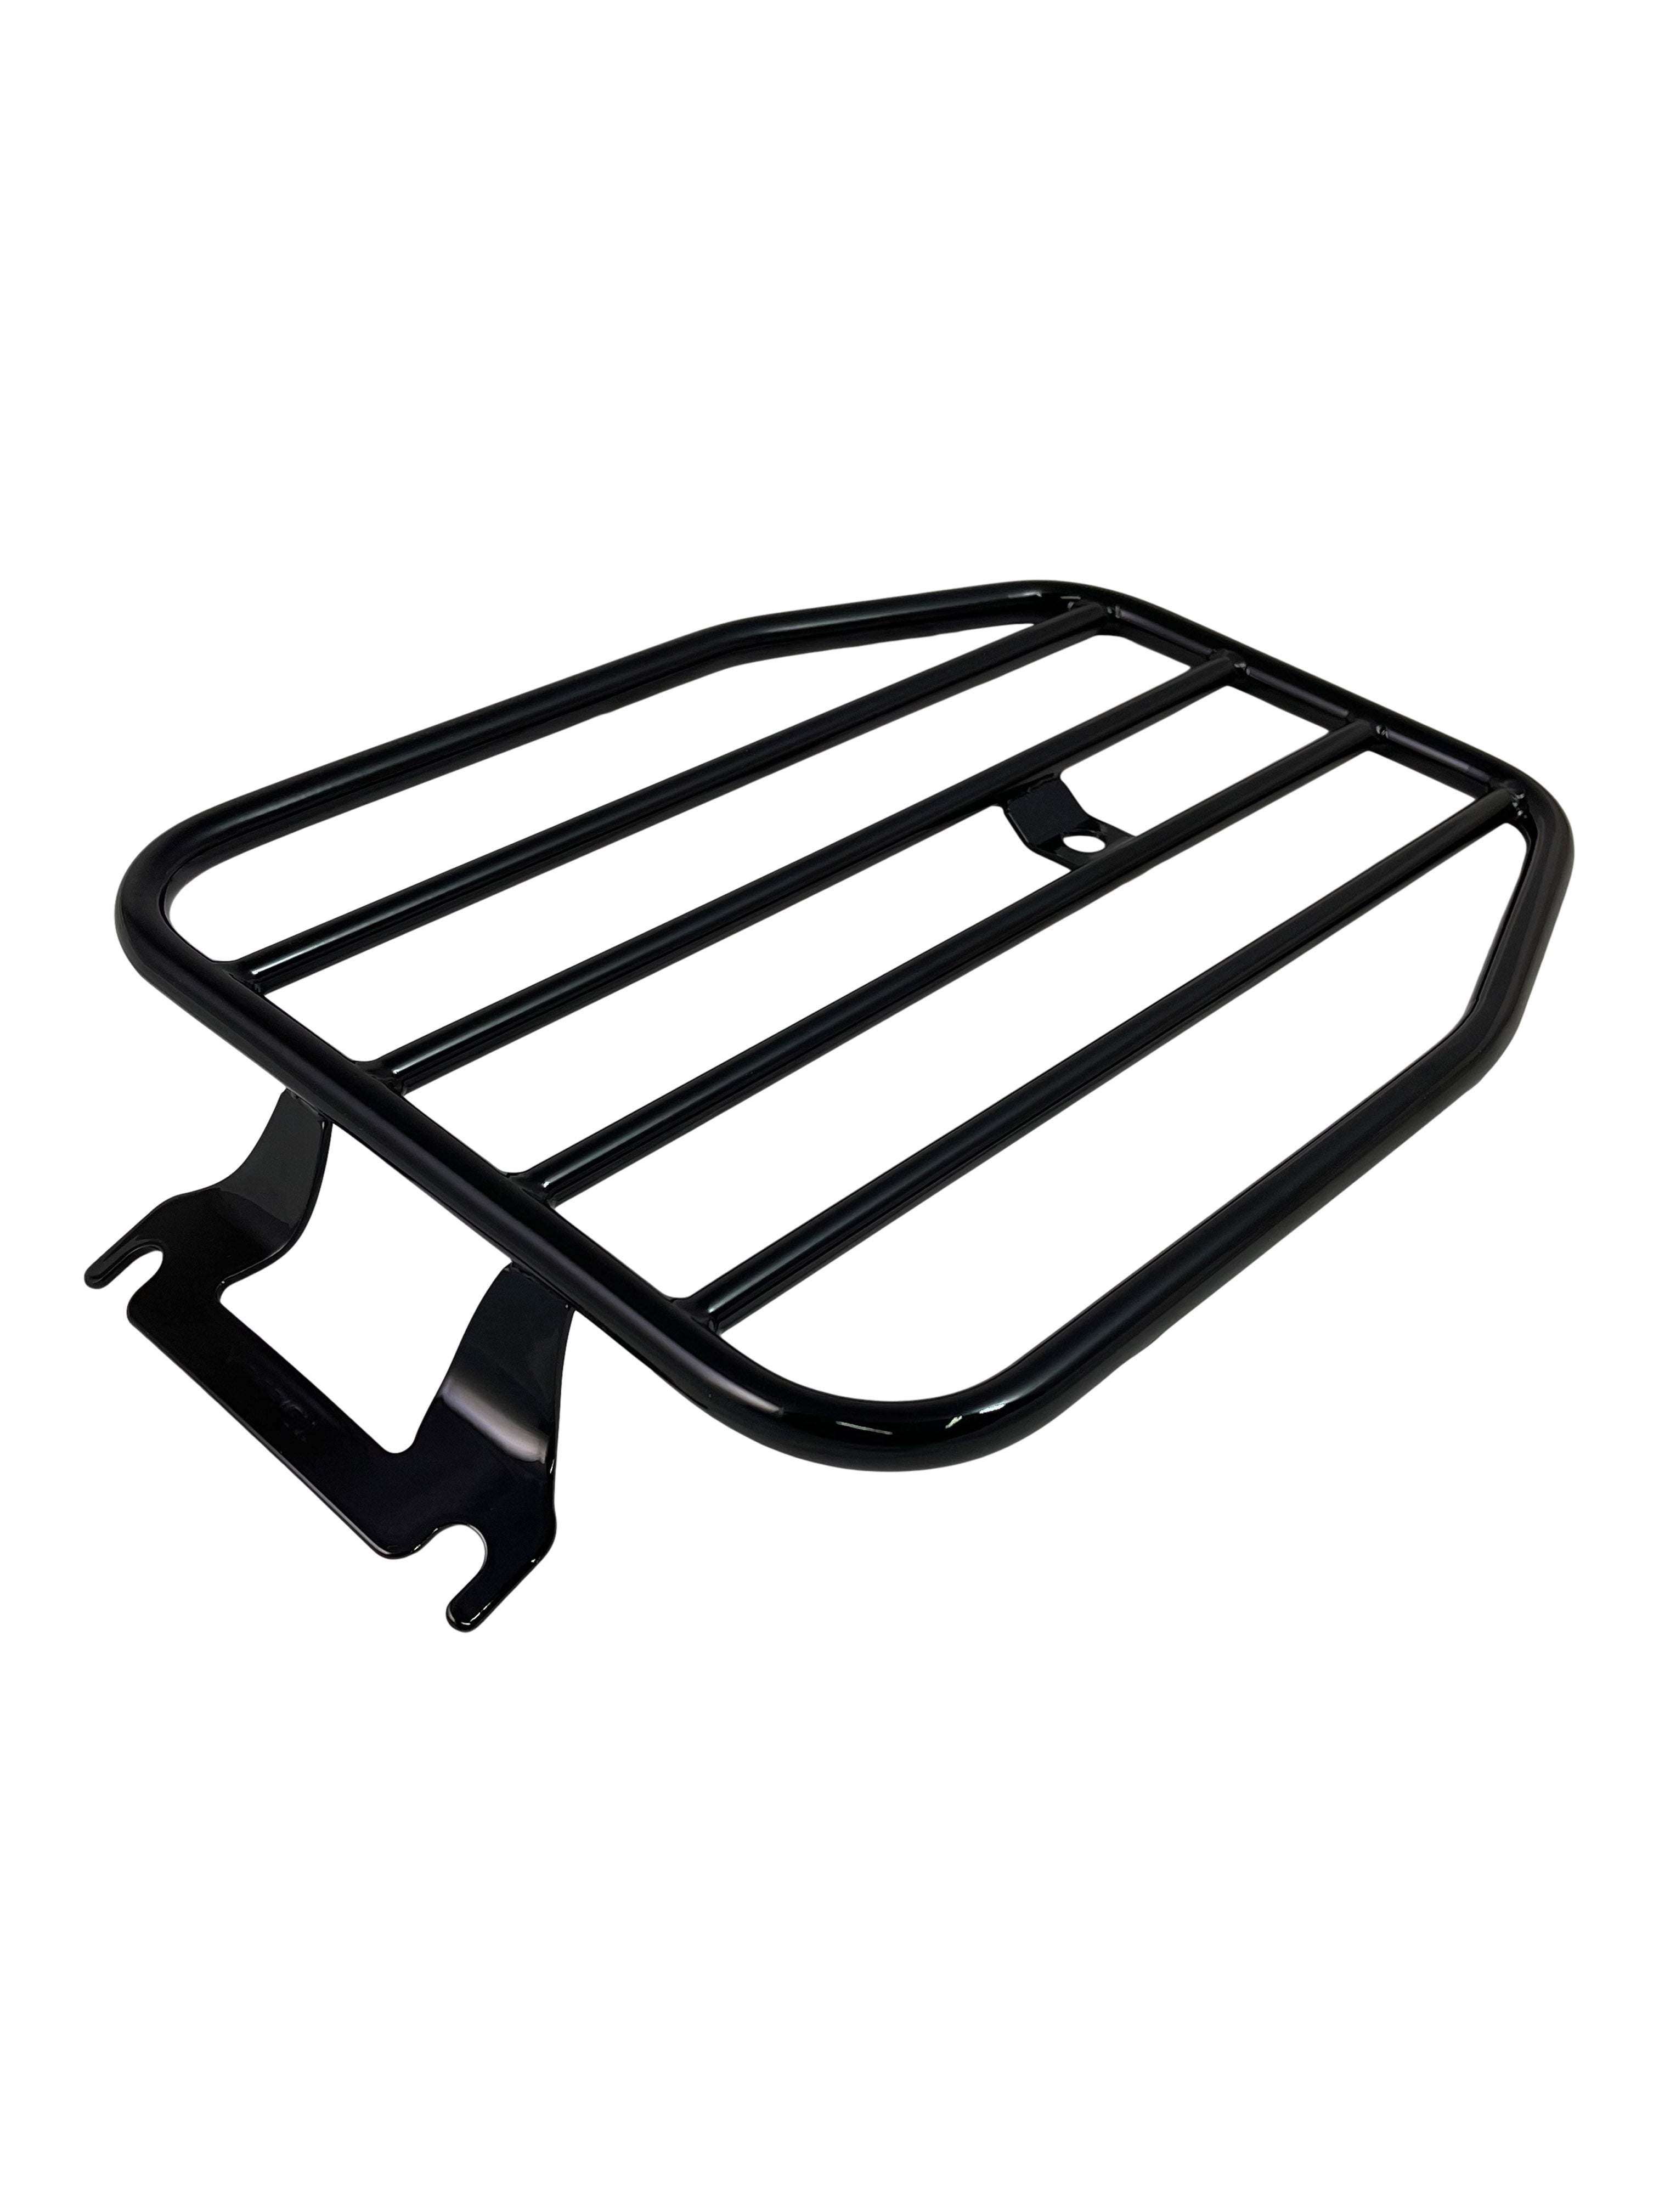 Harley Touring Solo Luggage Rack 10.5 in. Flat MWL-462